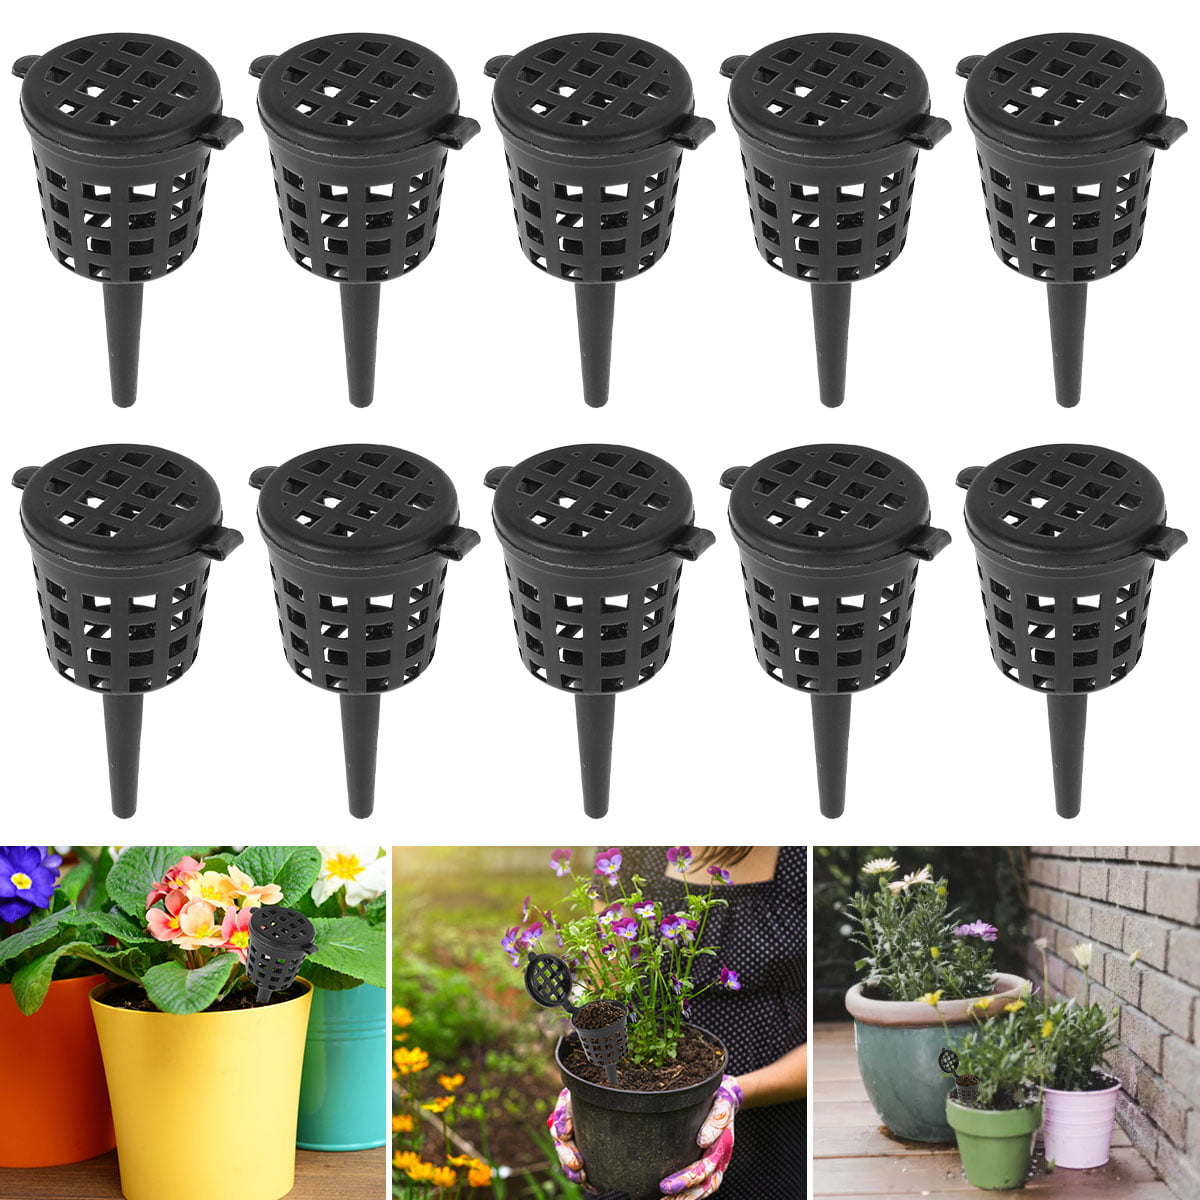 10 SMALL BASKET YOUNG PLANT SPROUT POT HANG DECORATE GARDEN ORCHID THICK PLASTIC 